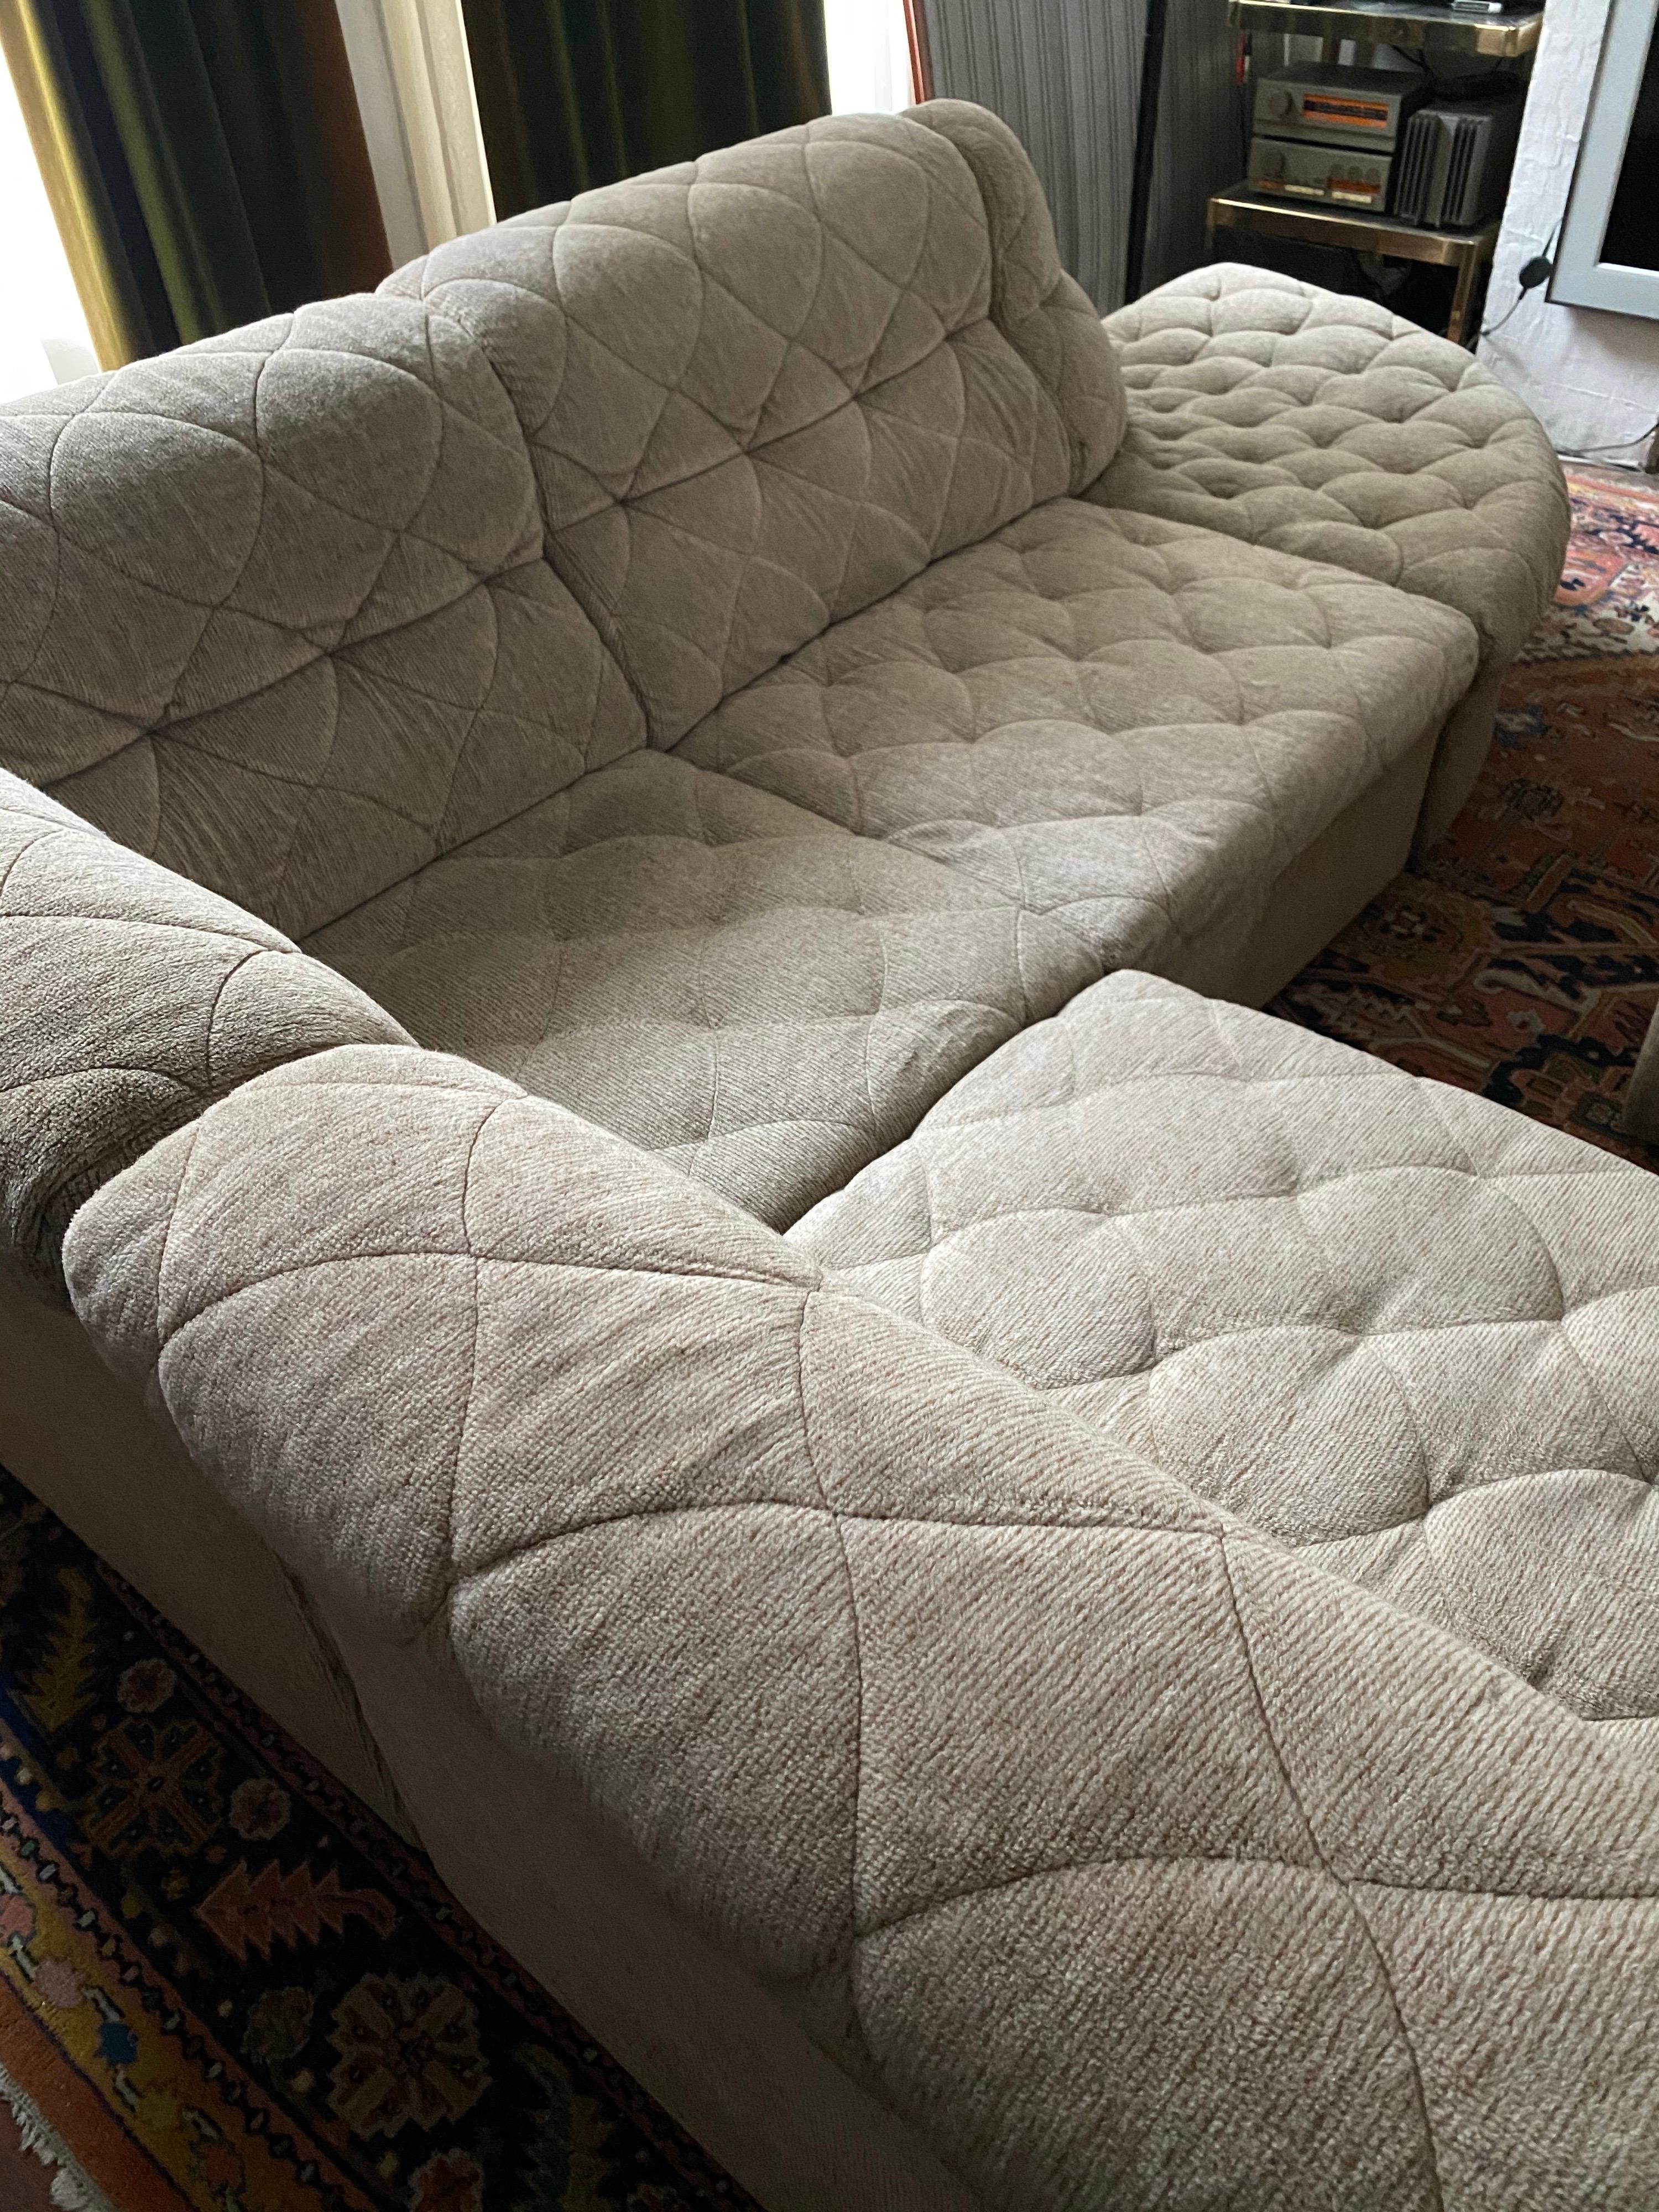 Laauser Germany Modular Seating Landscape Corner Sofa, 8+ Elements In Excellent Condition For Sale In Amsterdam, NL